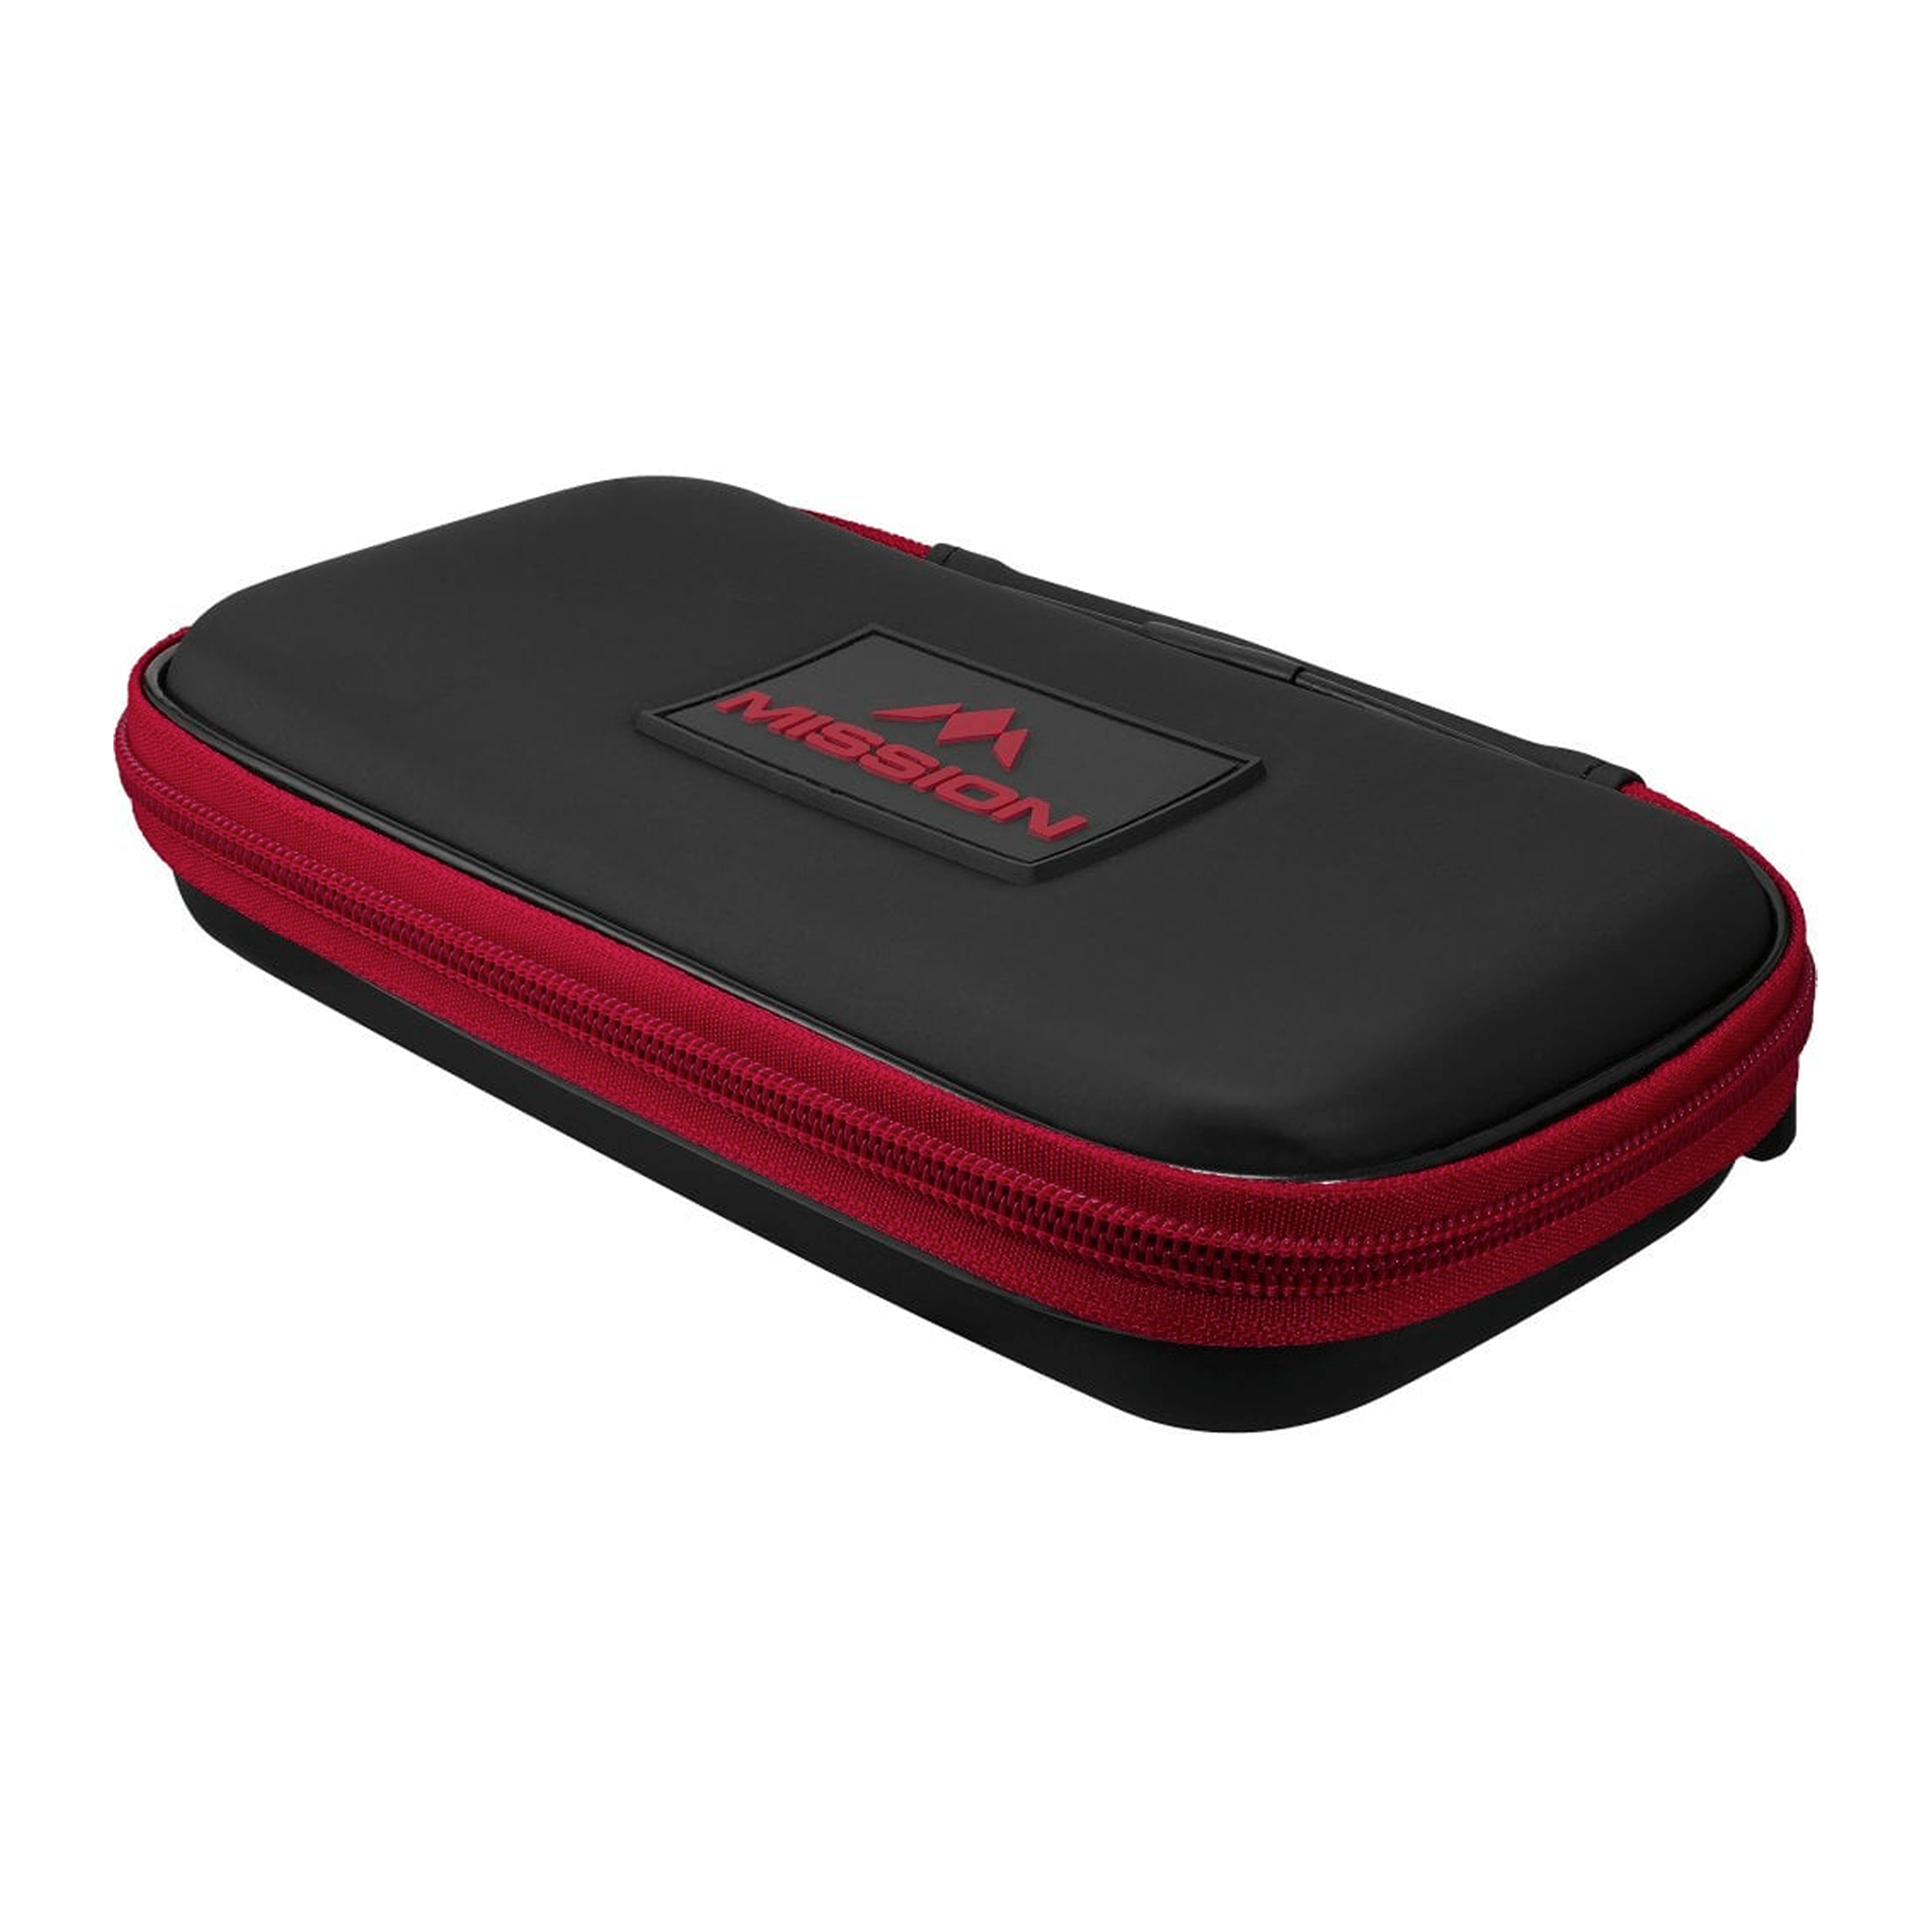 Mission Freedom XL Darts Case Cases